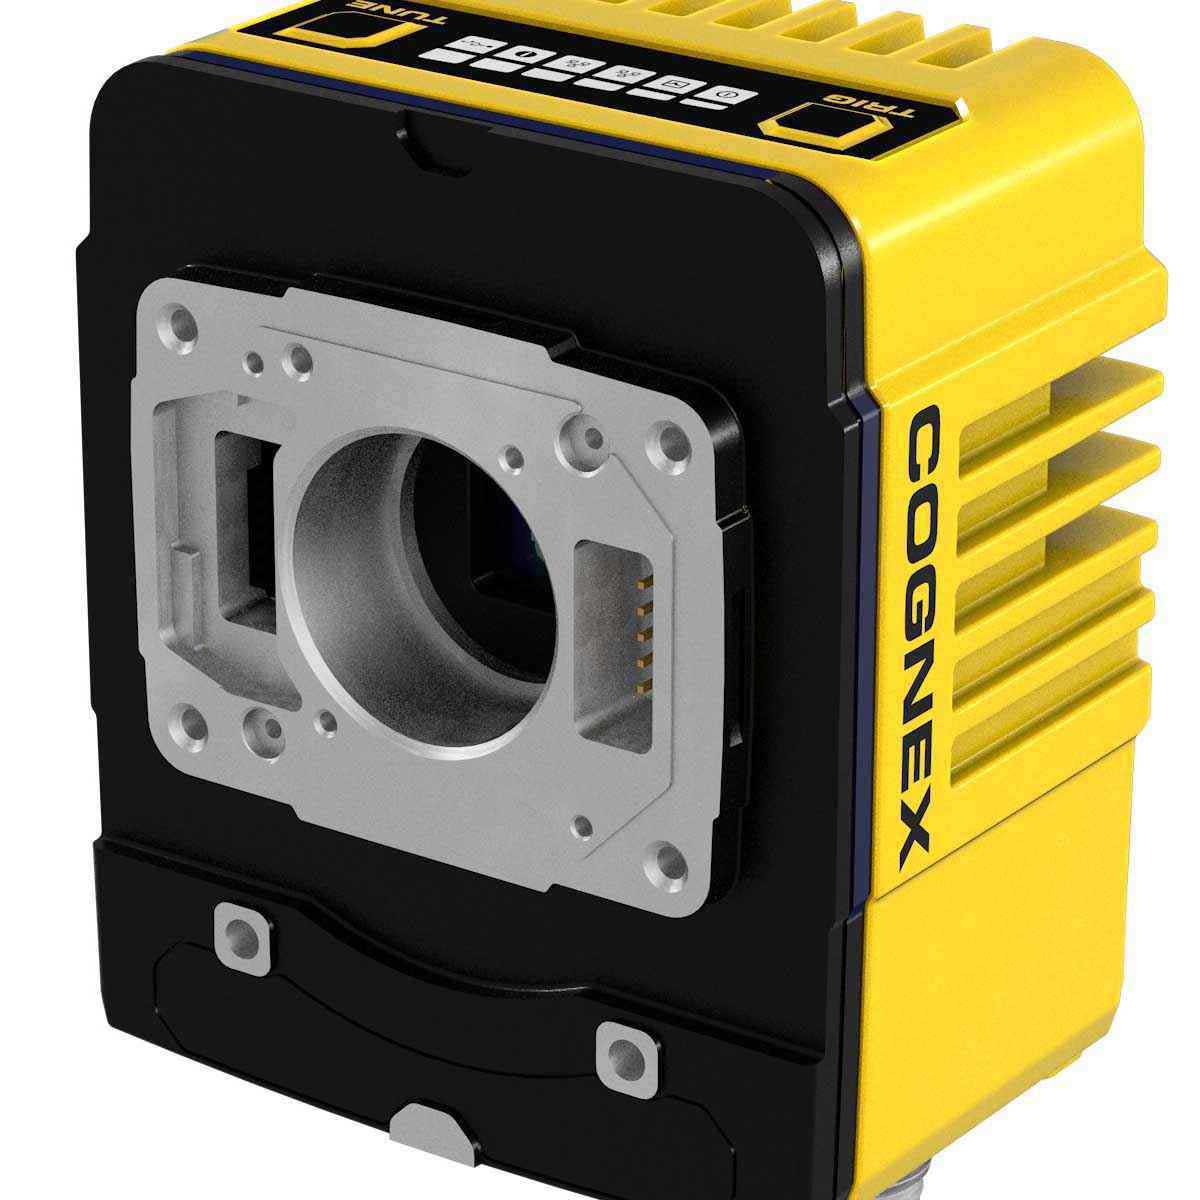 IS3805CS-00001-SA COGNEX IS3805CS 5MP System Only  All EL